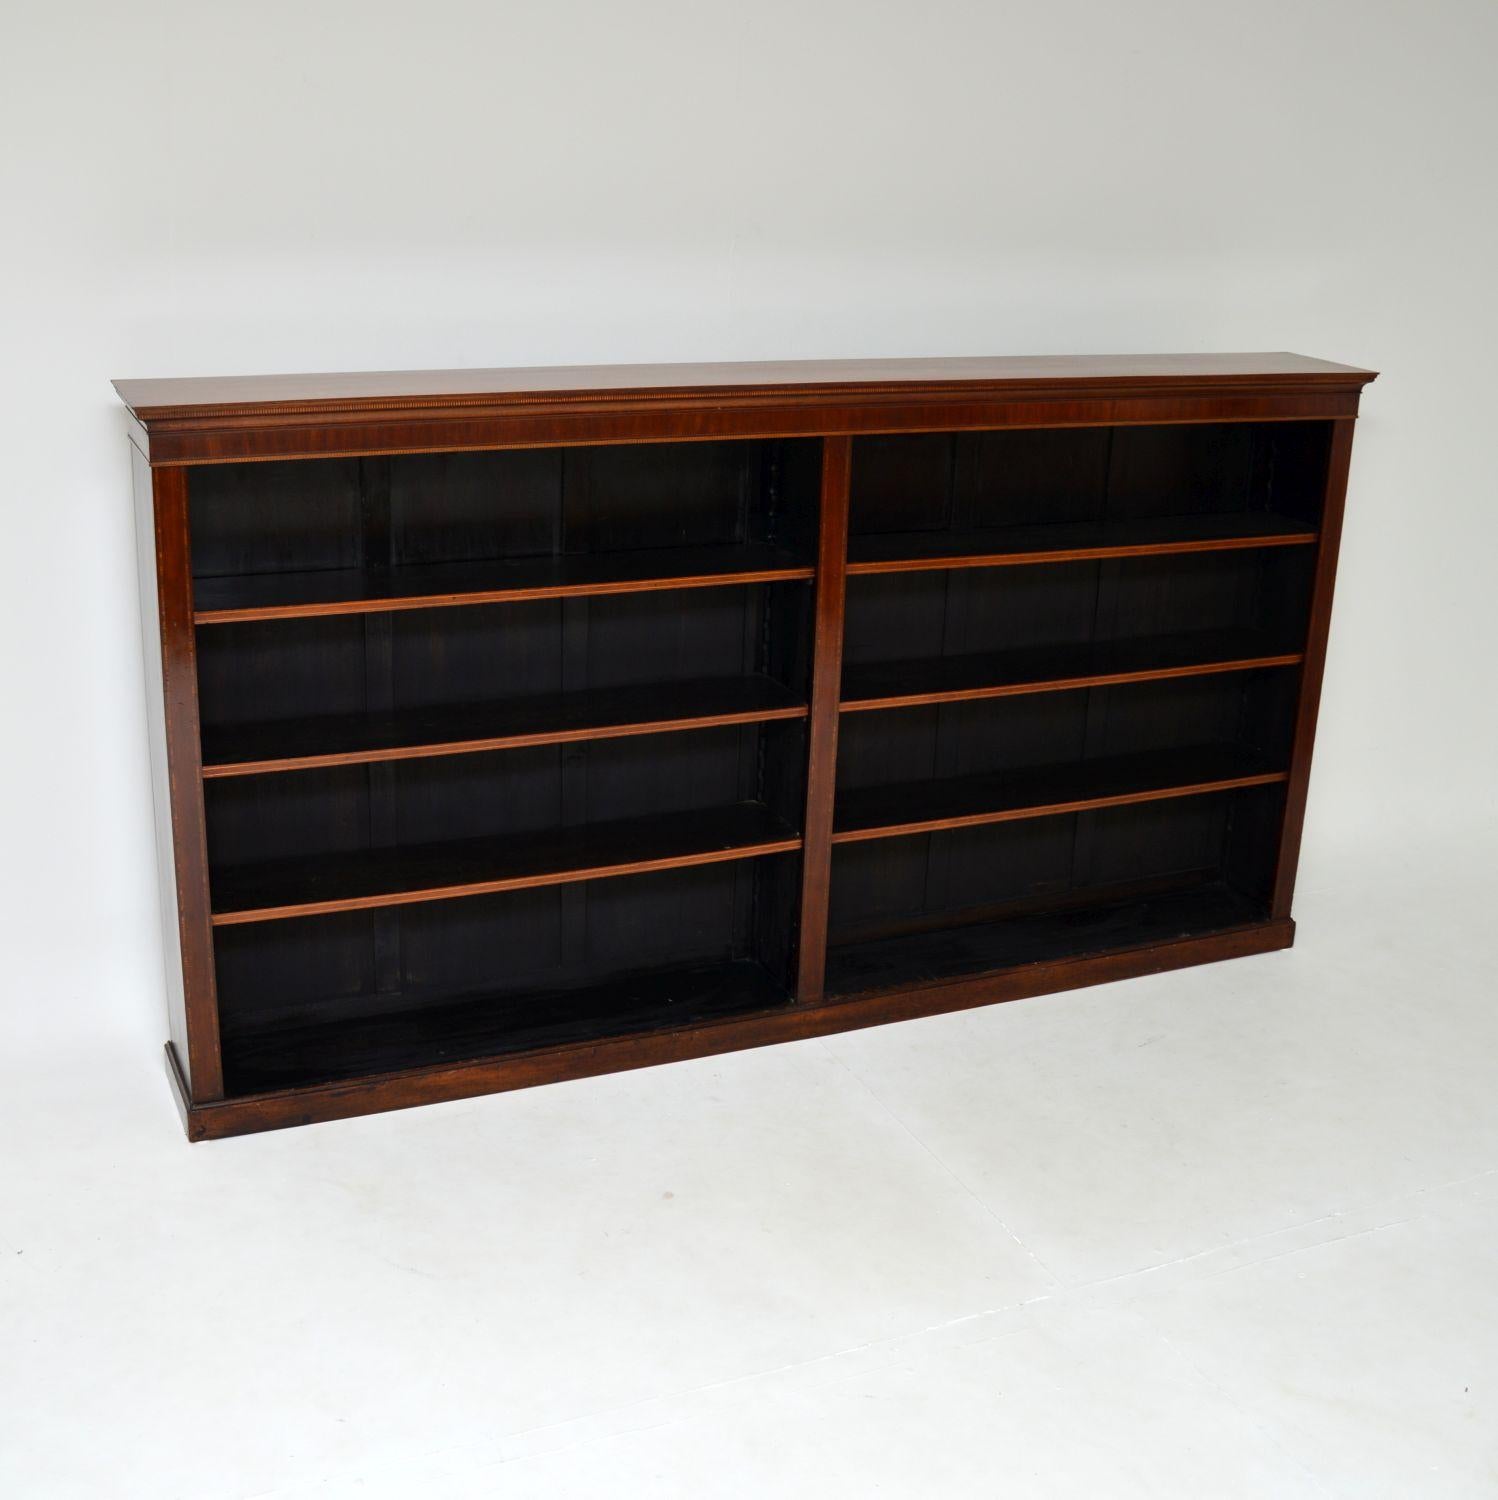 A large and impressive antique Edwardian open bookcase. This was made in England, it dates from around the 1890-1910 period.

It is of superb quality and is a great size. It is very wide, not too high and not too deep, so though it contains lots of